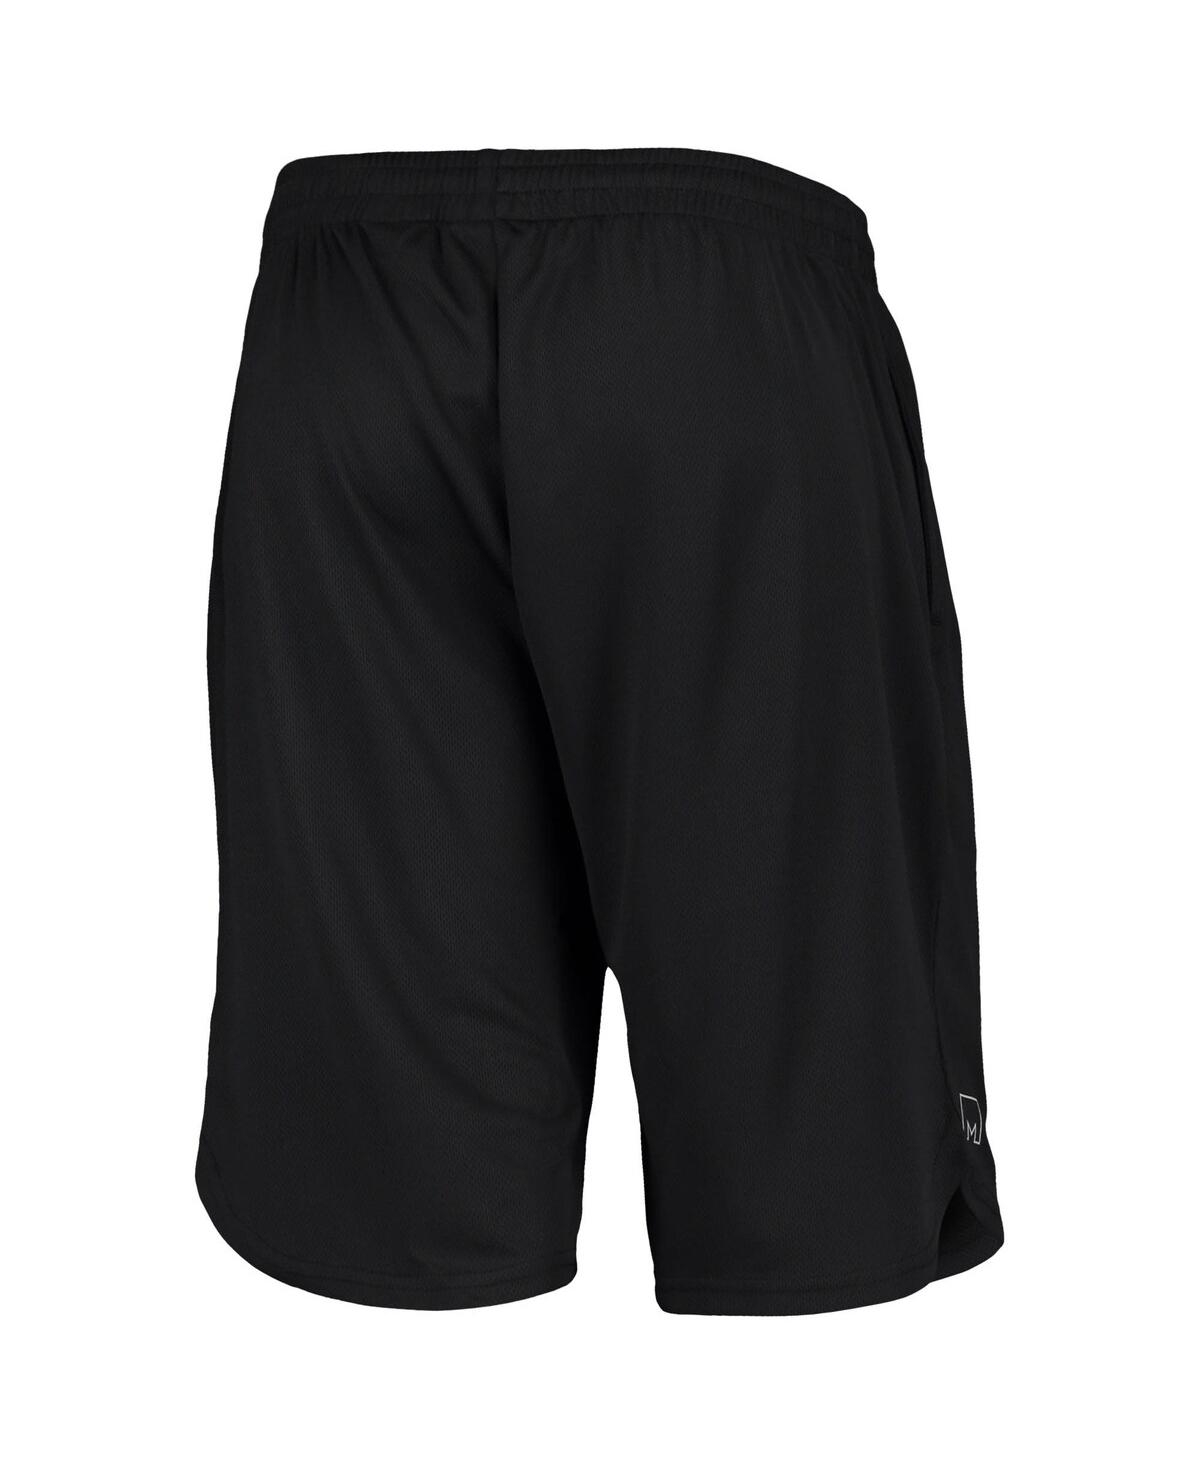 Shop Msx By Michael Strahan Men's  Black Los Angeles Chargers Training Shorts